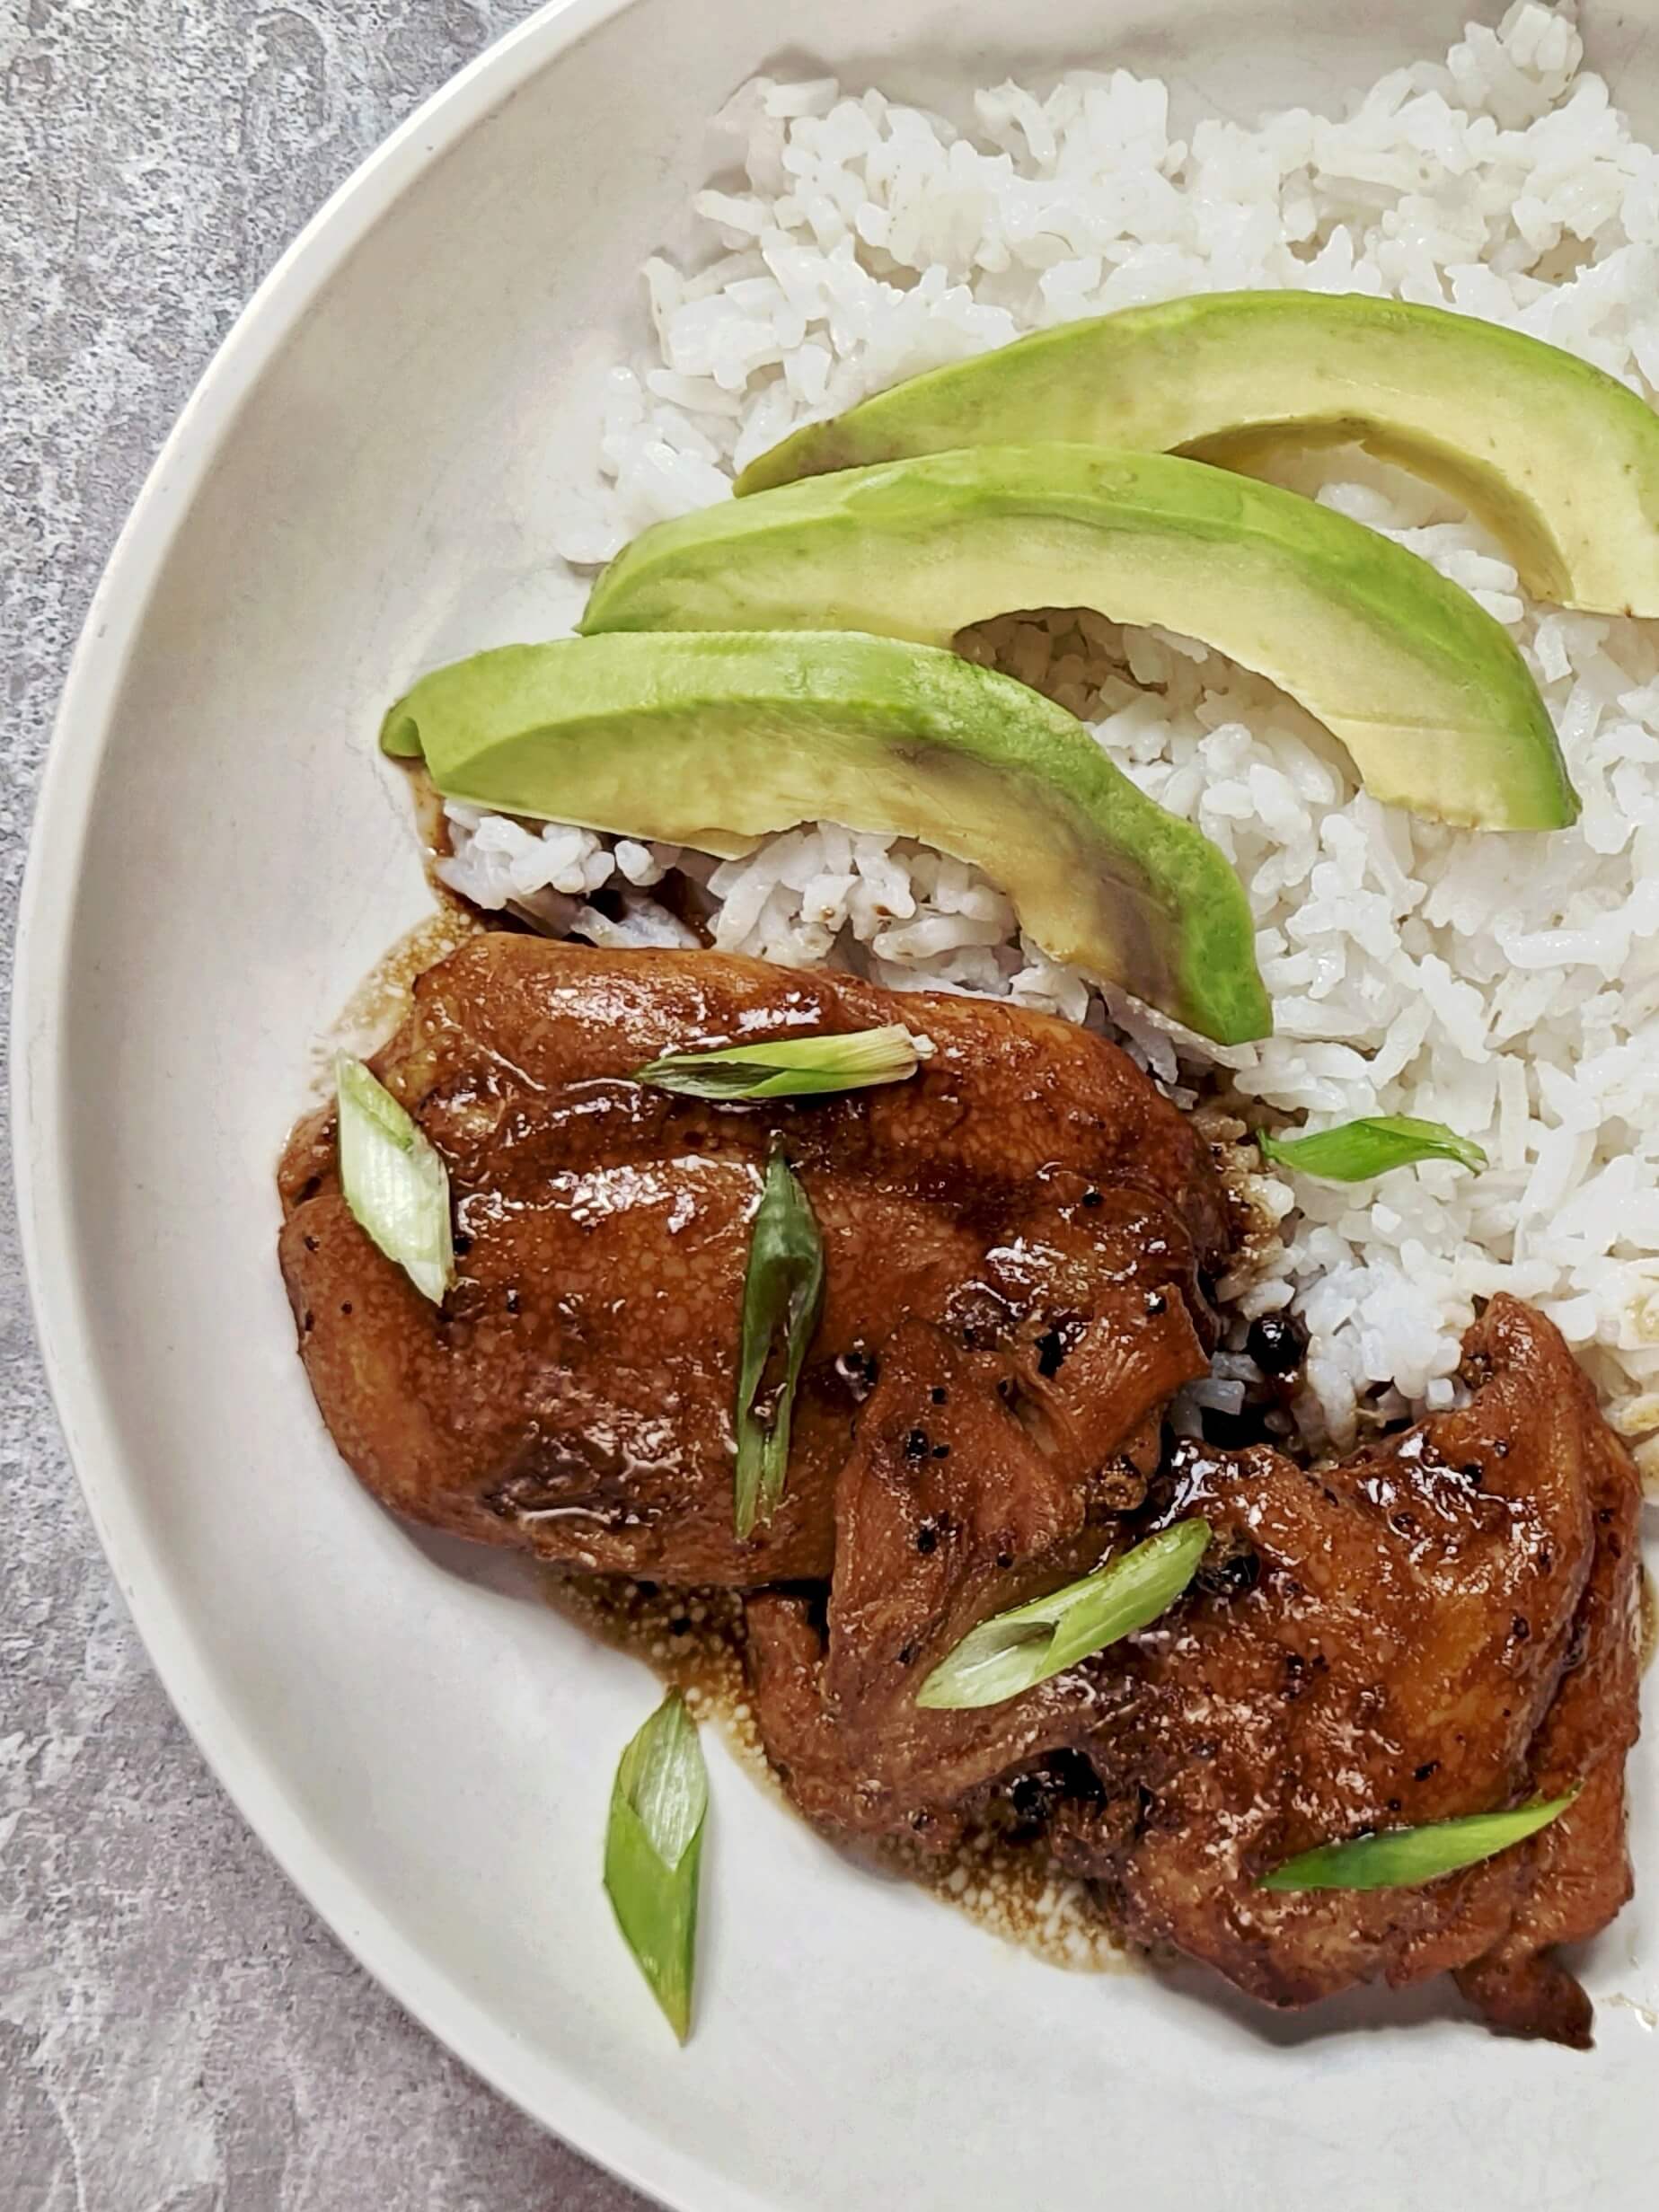 Adobong Manok on a plate with white rice and avocado slices.